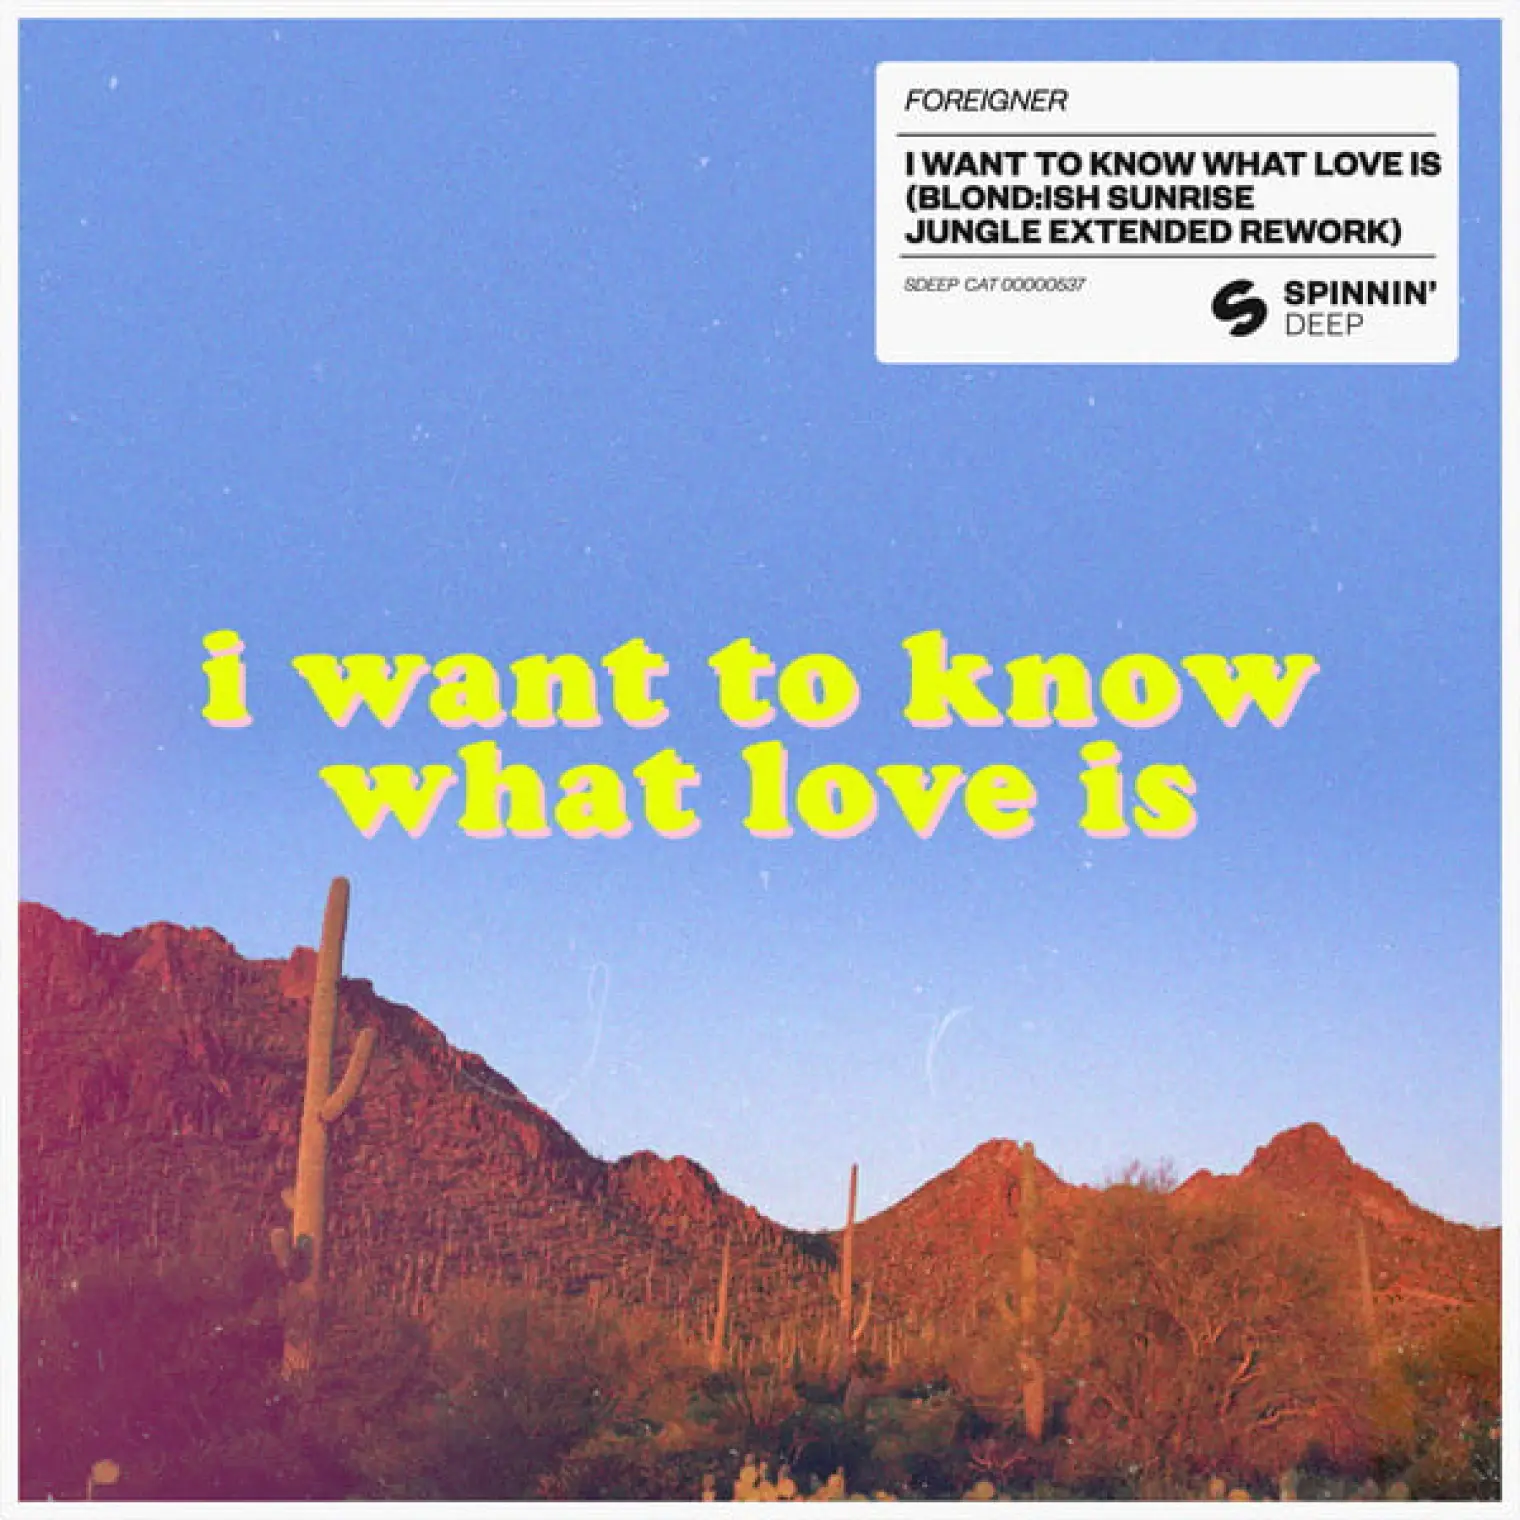 I Want To Know What Love Is (BLOND:ISH Sunrise Jungle Extended Rework) -  Foreigner 